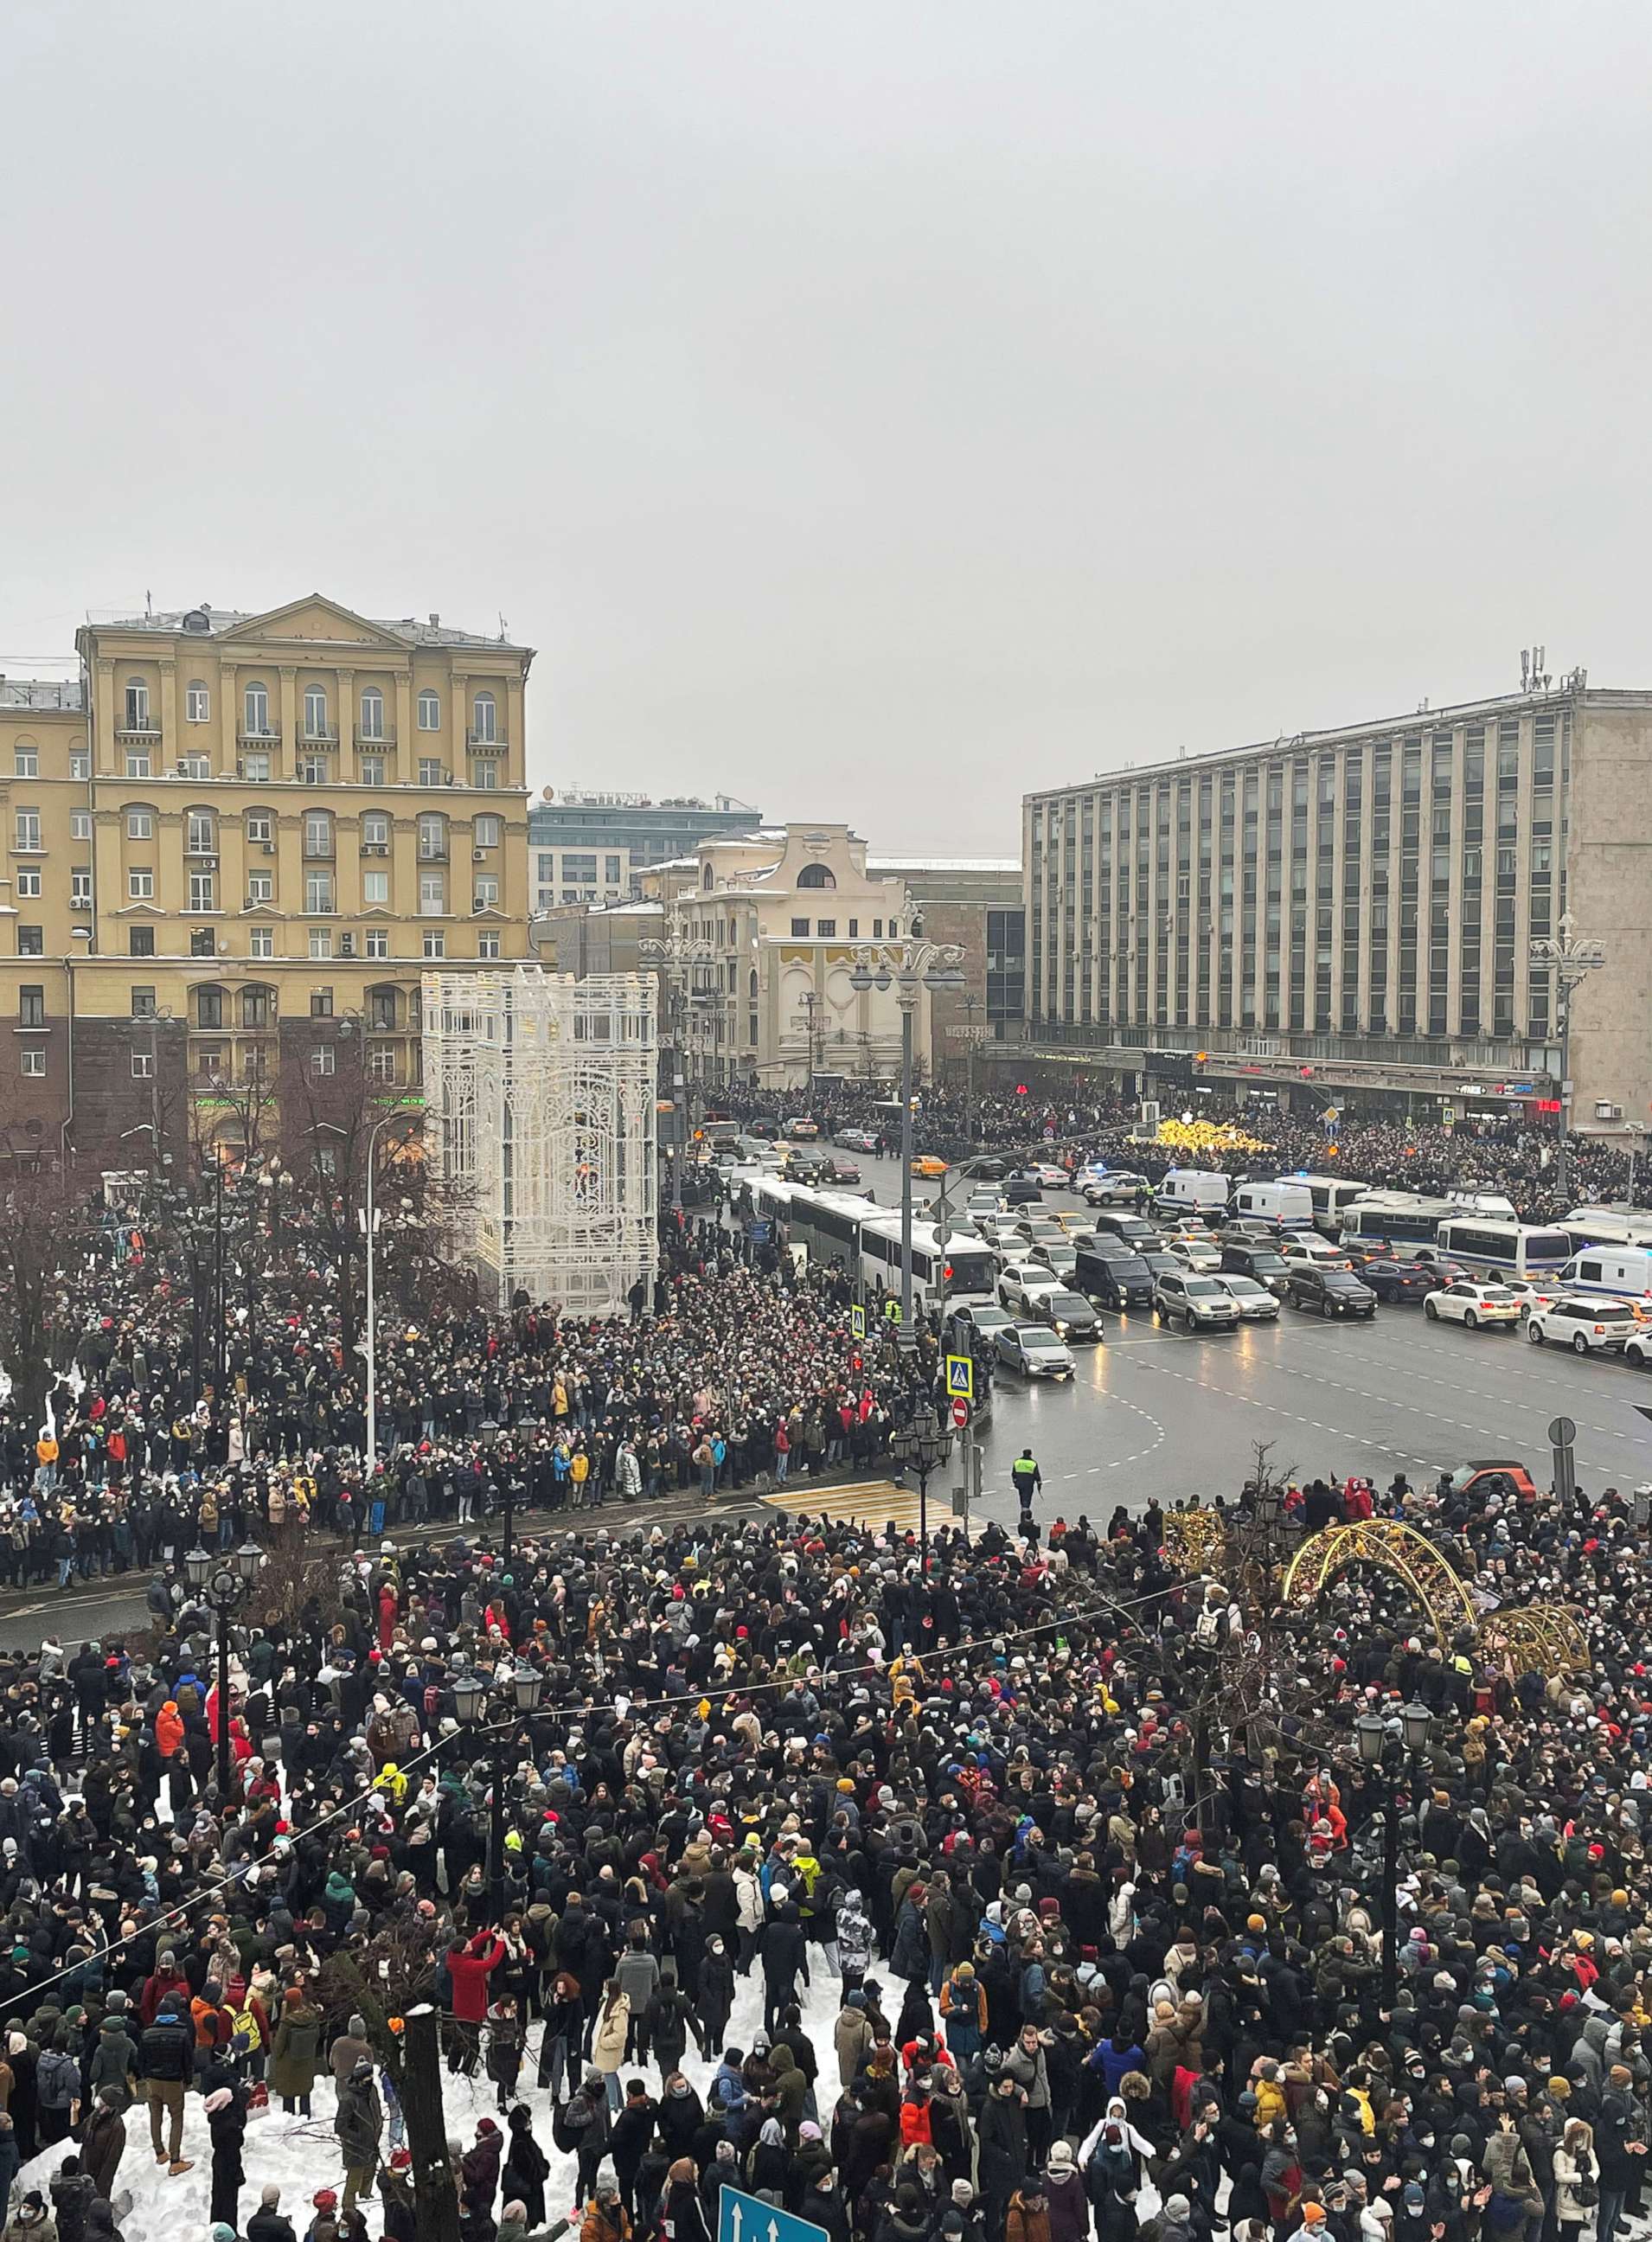 PHOTO: People attend a rally in support of jailed Russian opposition leader Alexey Navalny in Moscow, Russia Jan. 23, 2021.